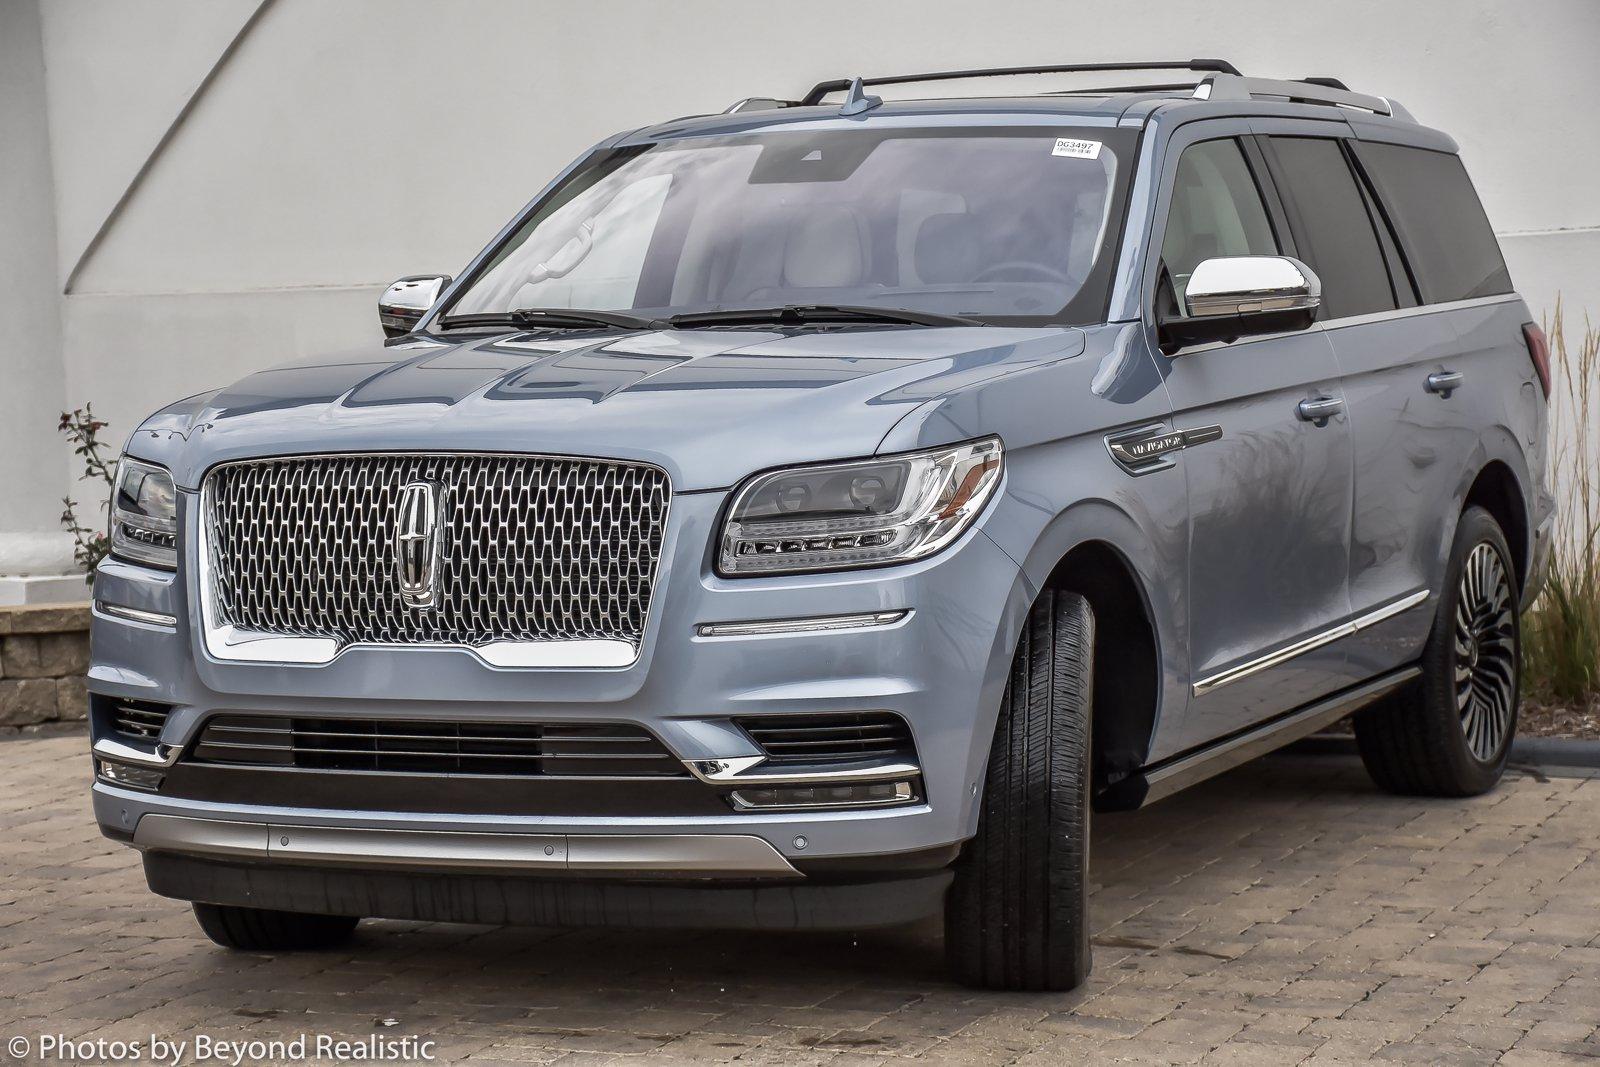 Used 2020 Lincoln Navigator Black Label, Rear Ent, | Downers Grove, IL